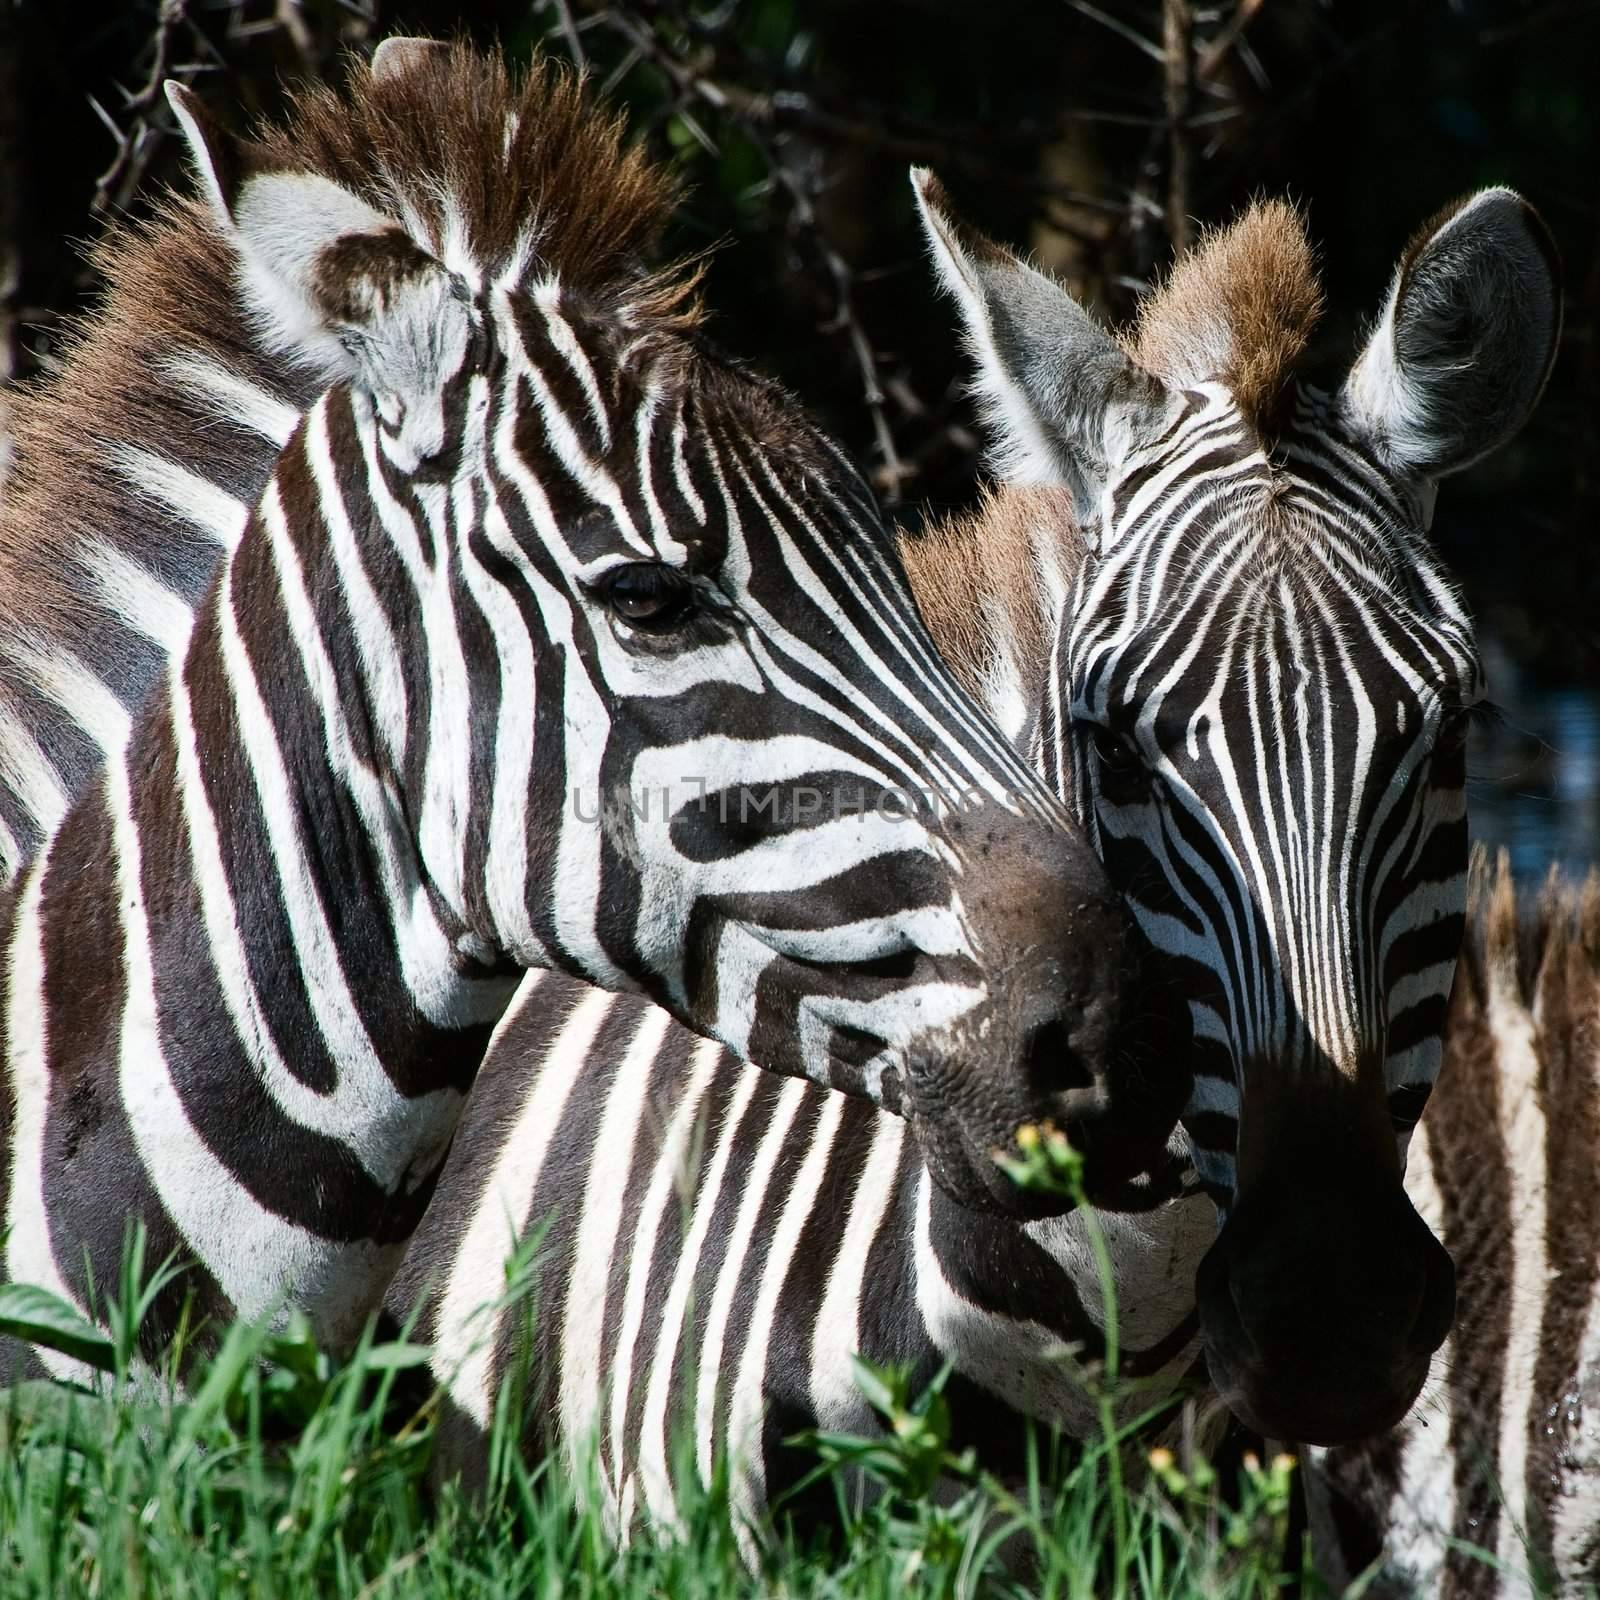 Double portrait of zebras. Two heads of a zebra close up against a dark background.